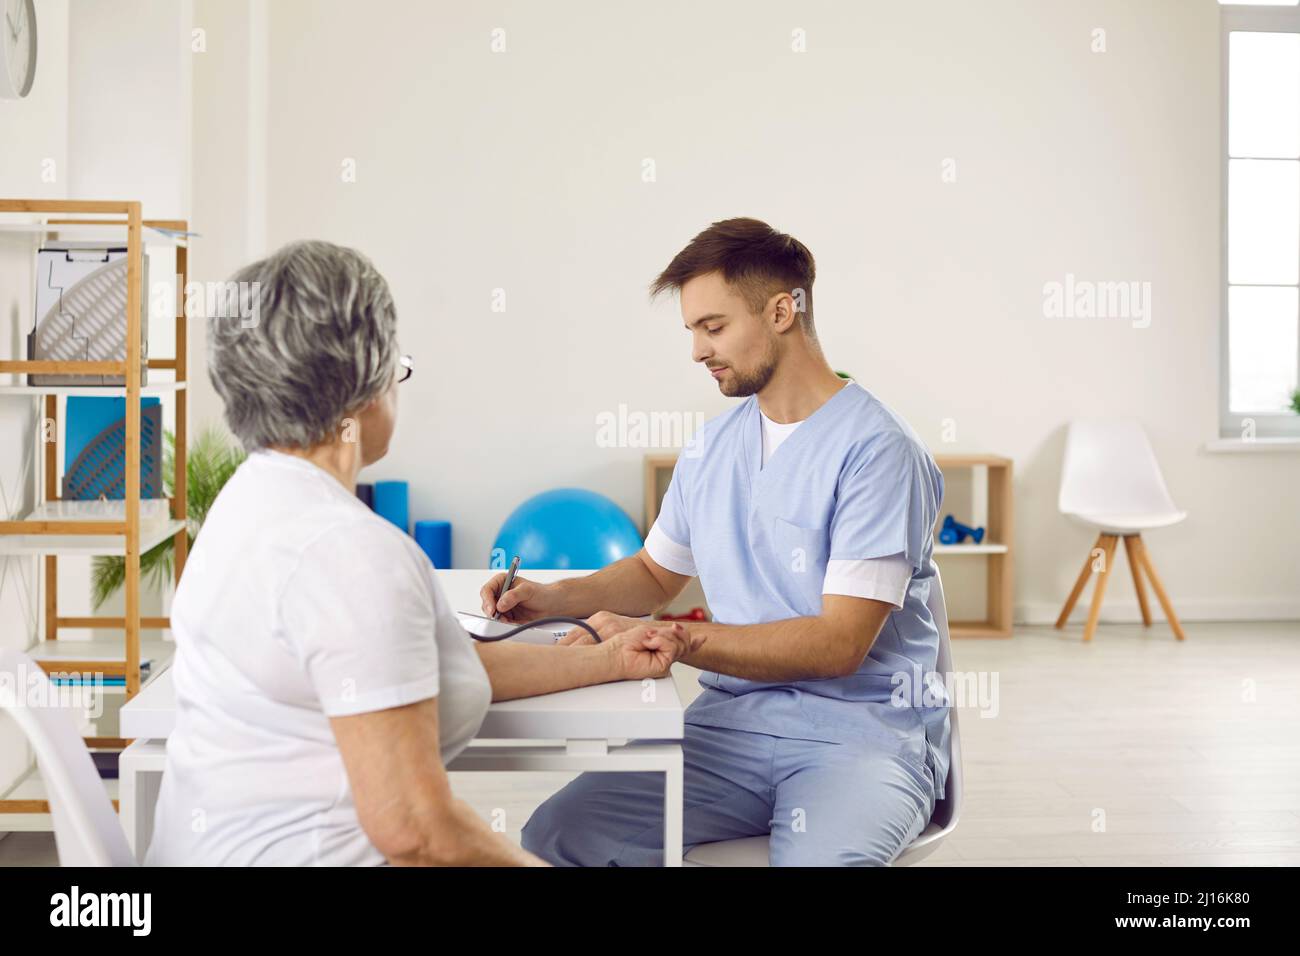 Senior woman with hypertension getting her blood pressure measured at clinic or hospital Stock Photo